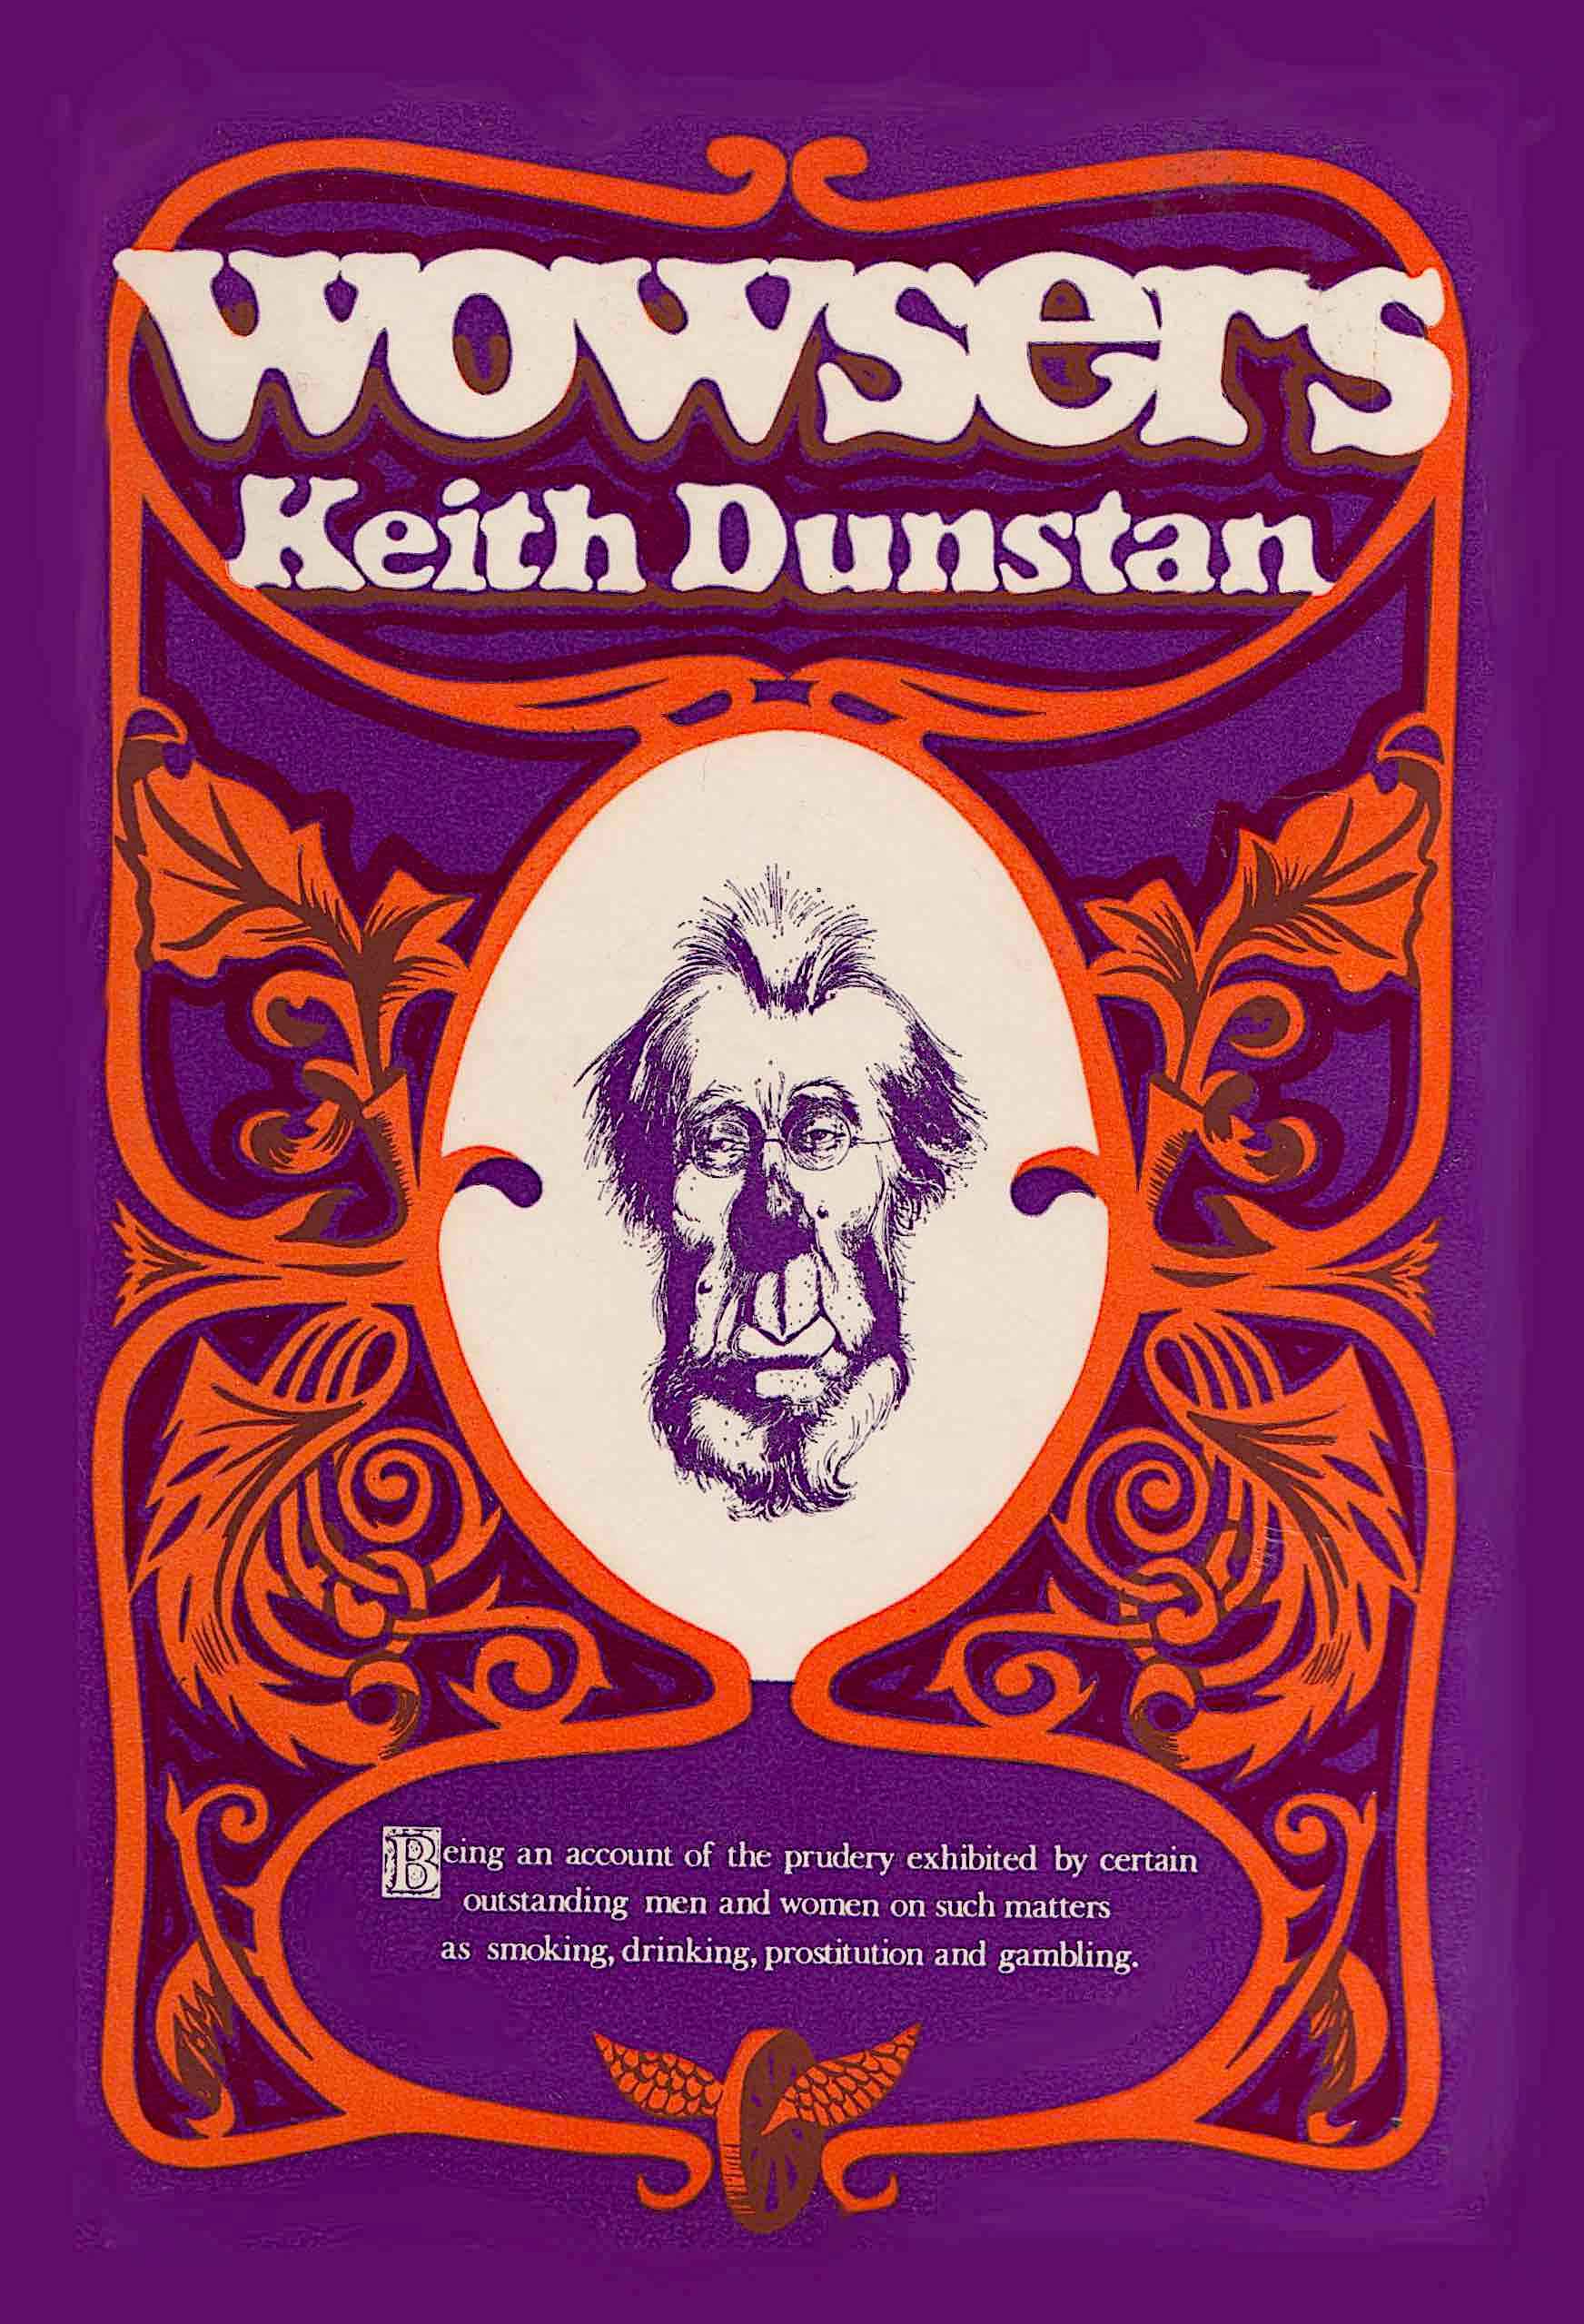 Cover of Keith DUnstan's 1968 book, Wowsers